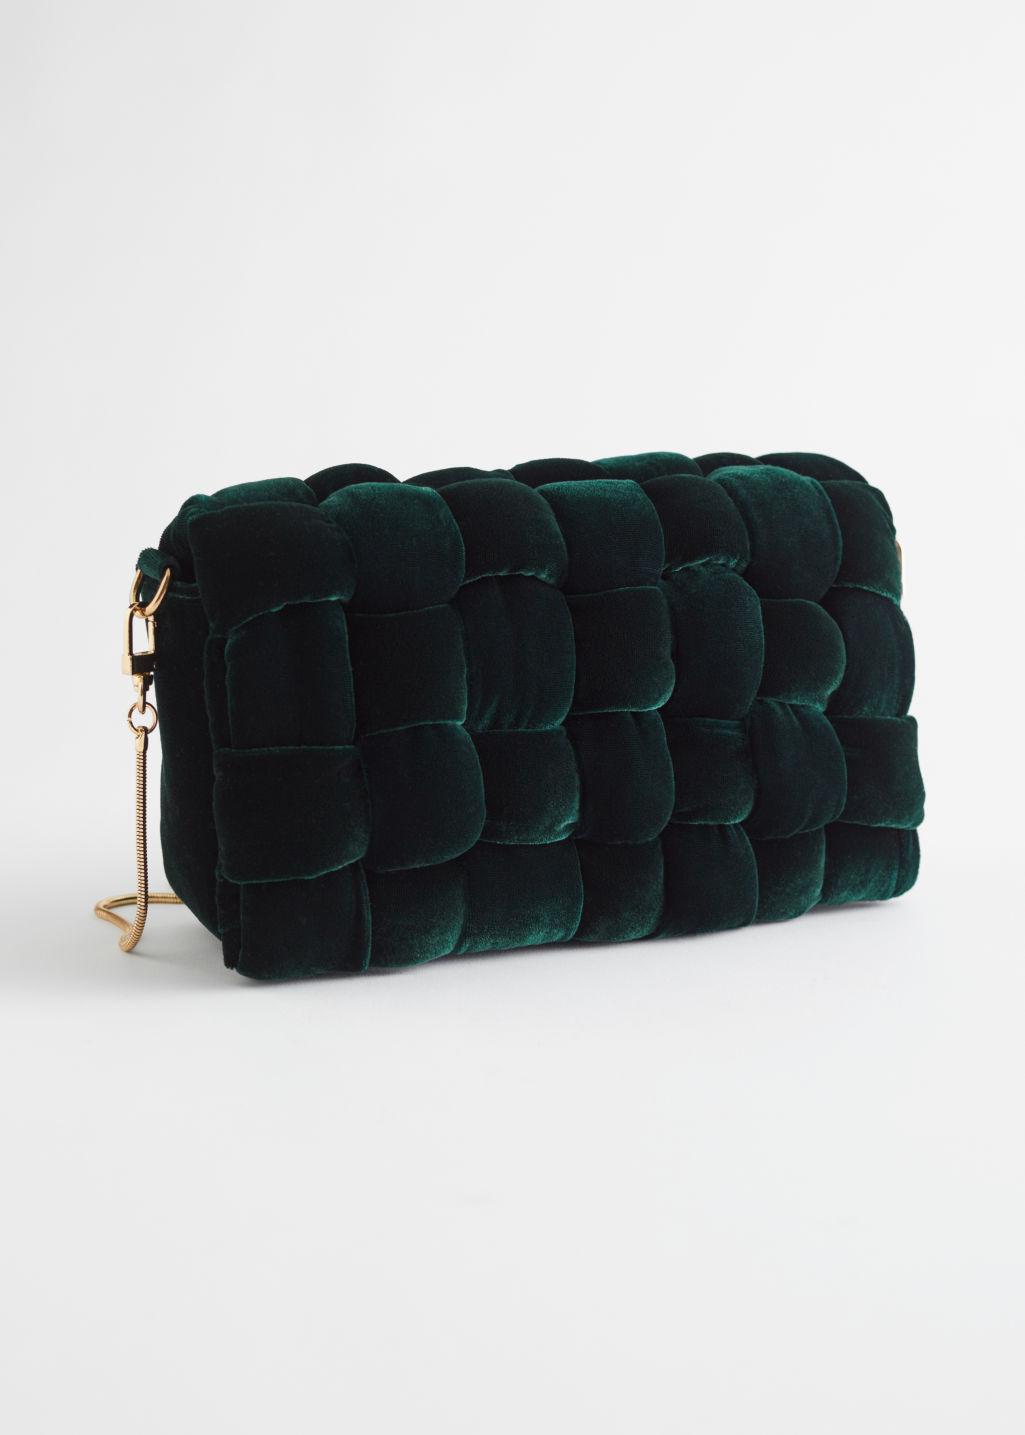 & Other Stories Quilted Velvet Clutch Bag in Green | Lyst